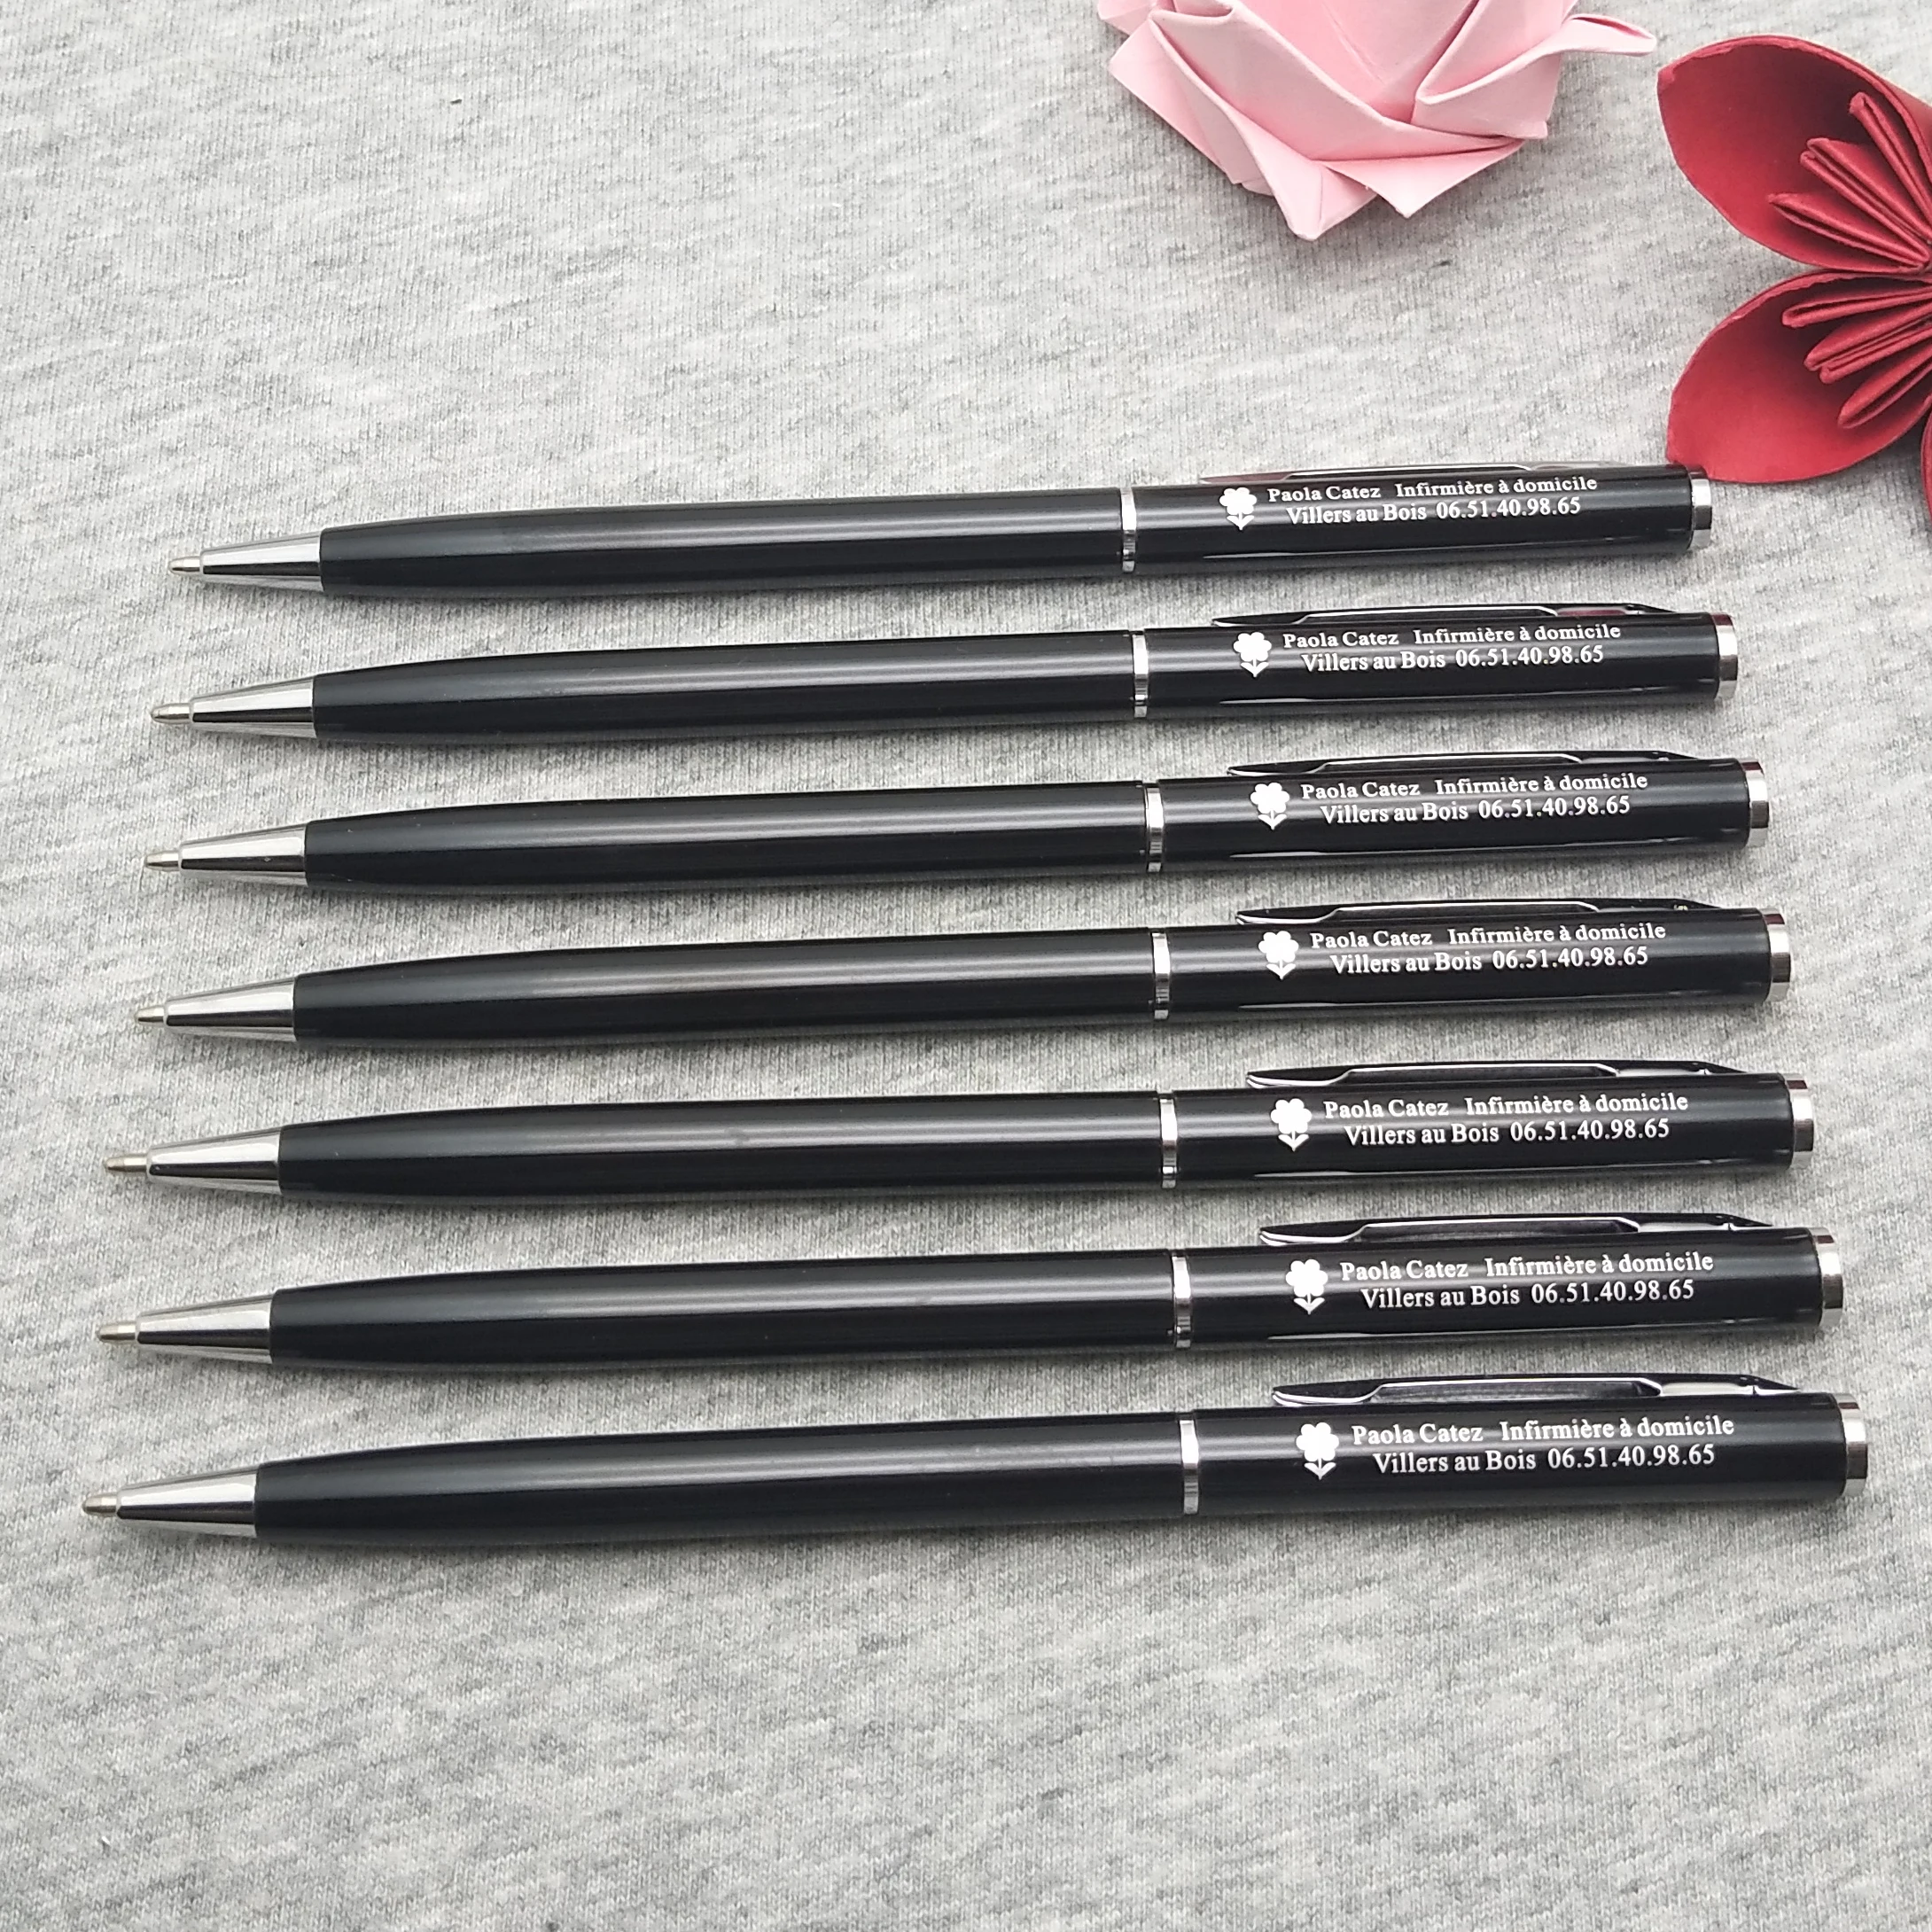 SALE cheap trade show giveaways sports events gifts wedding party giveaways custom logo text on metal pens